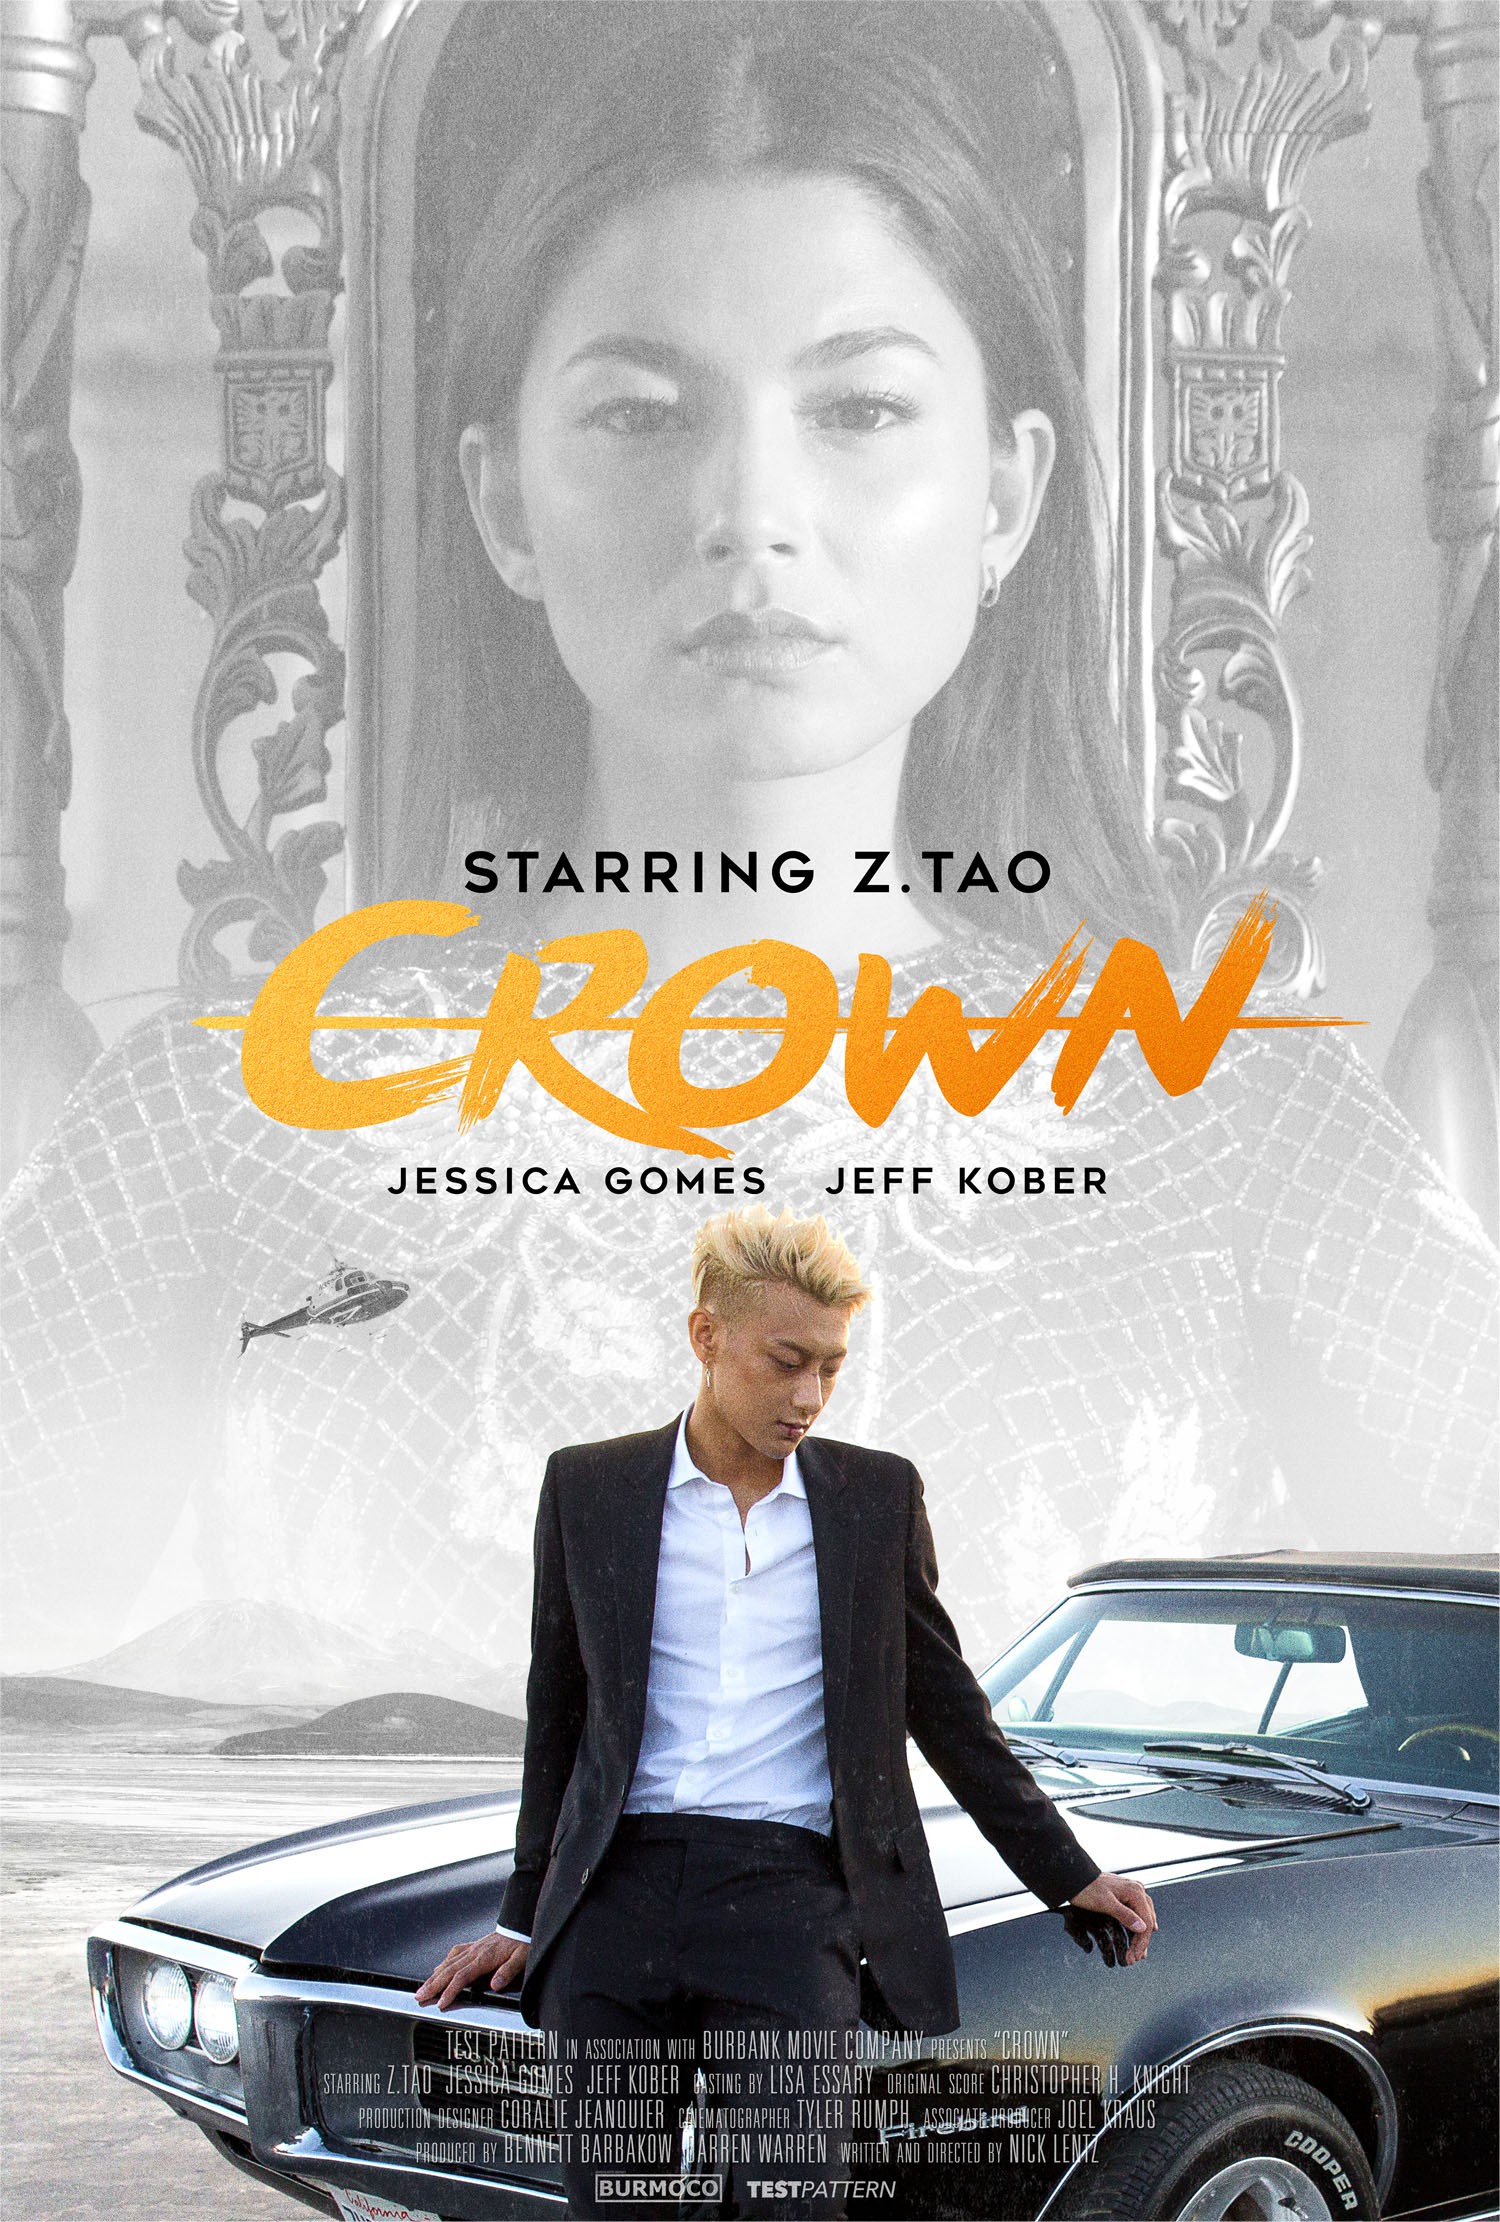 Mega Sized Movie Poster Image for Crown